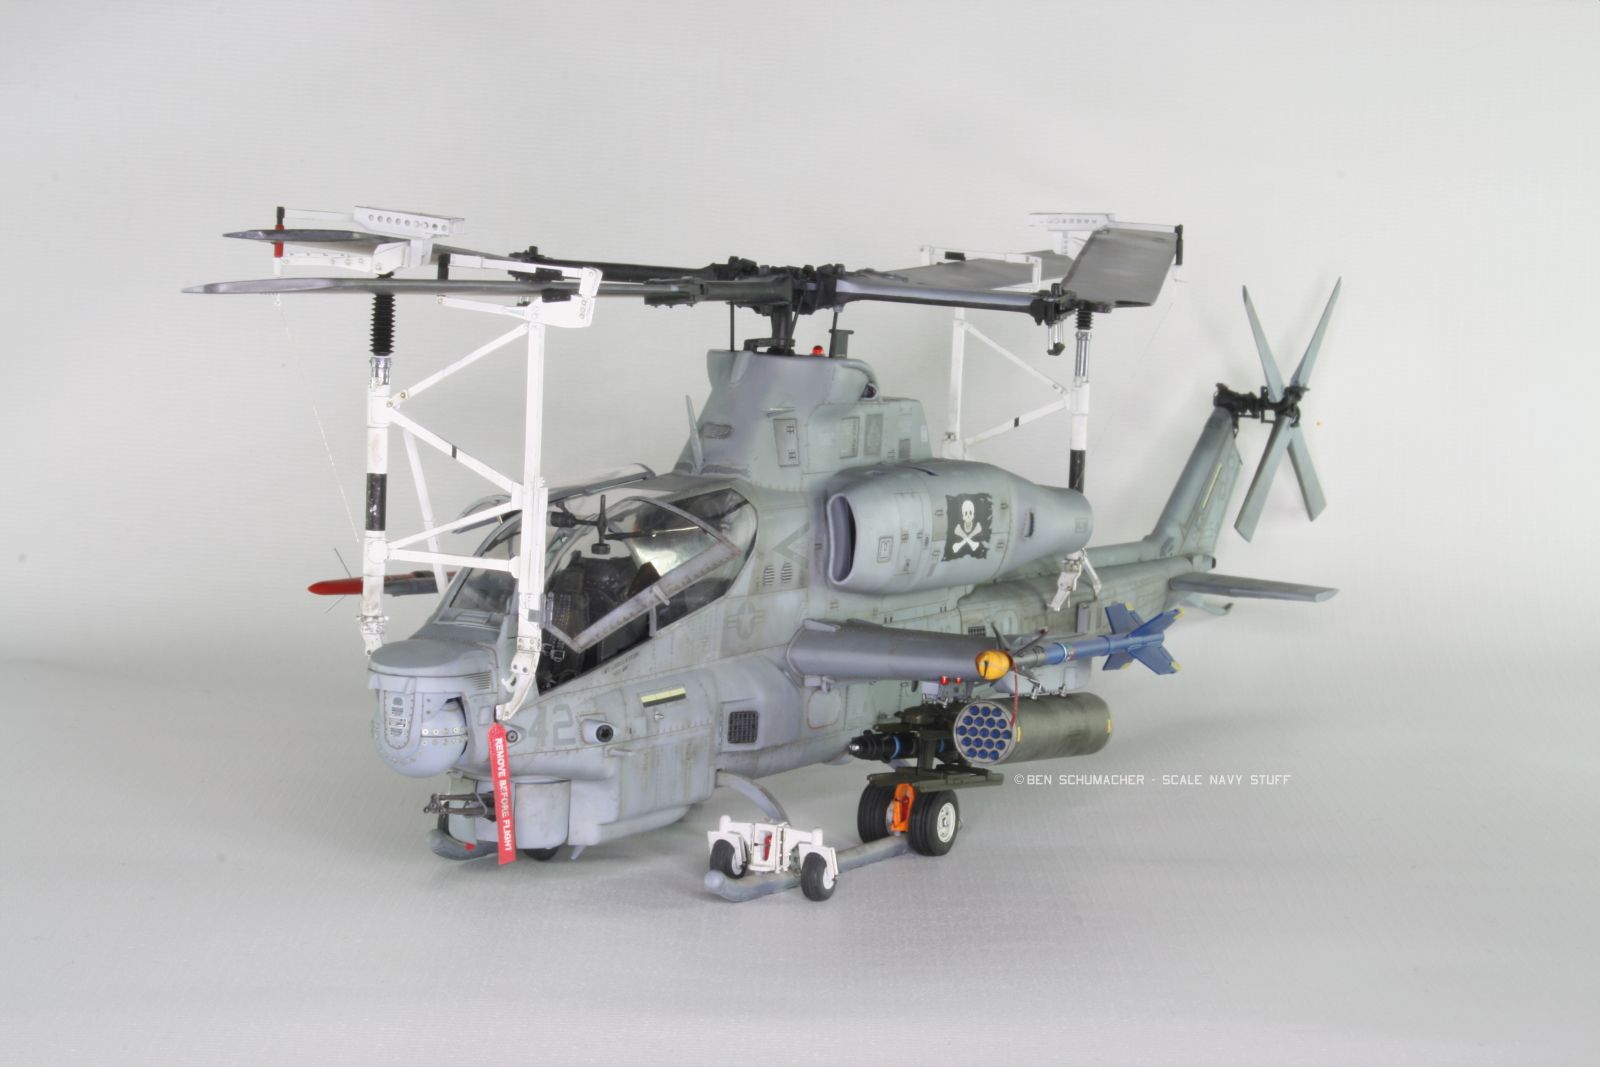 AH-1Z Viper, Academy 1/35 - Ready for Inspection - Large Scale Planes